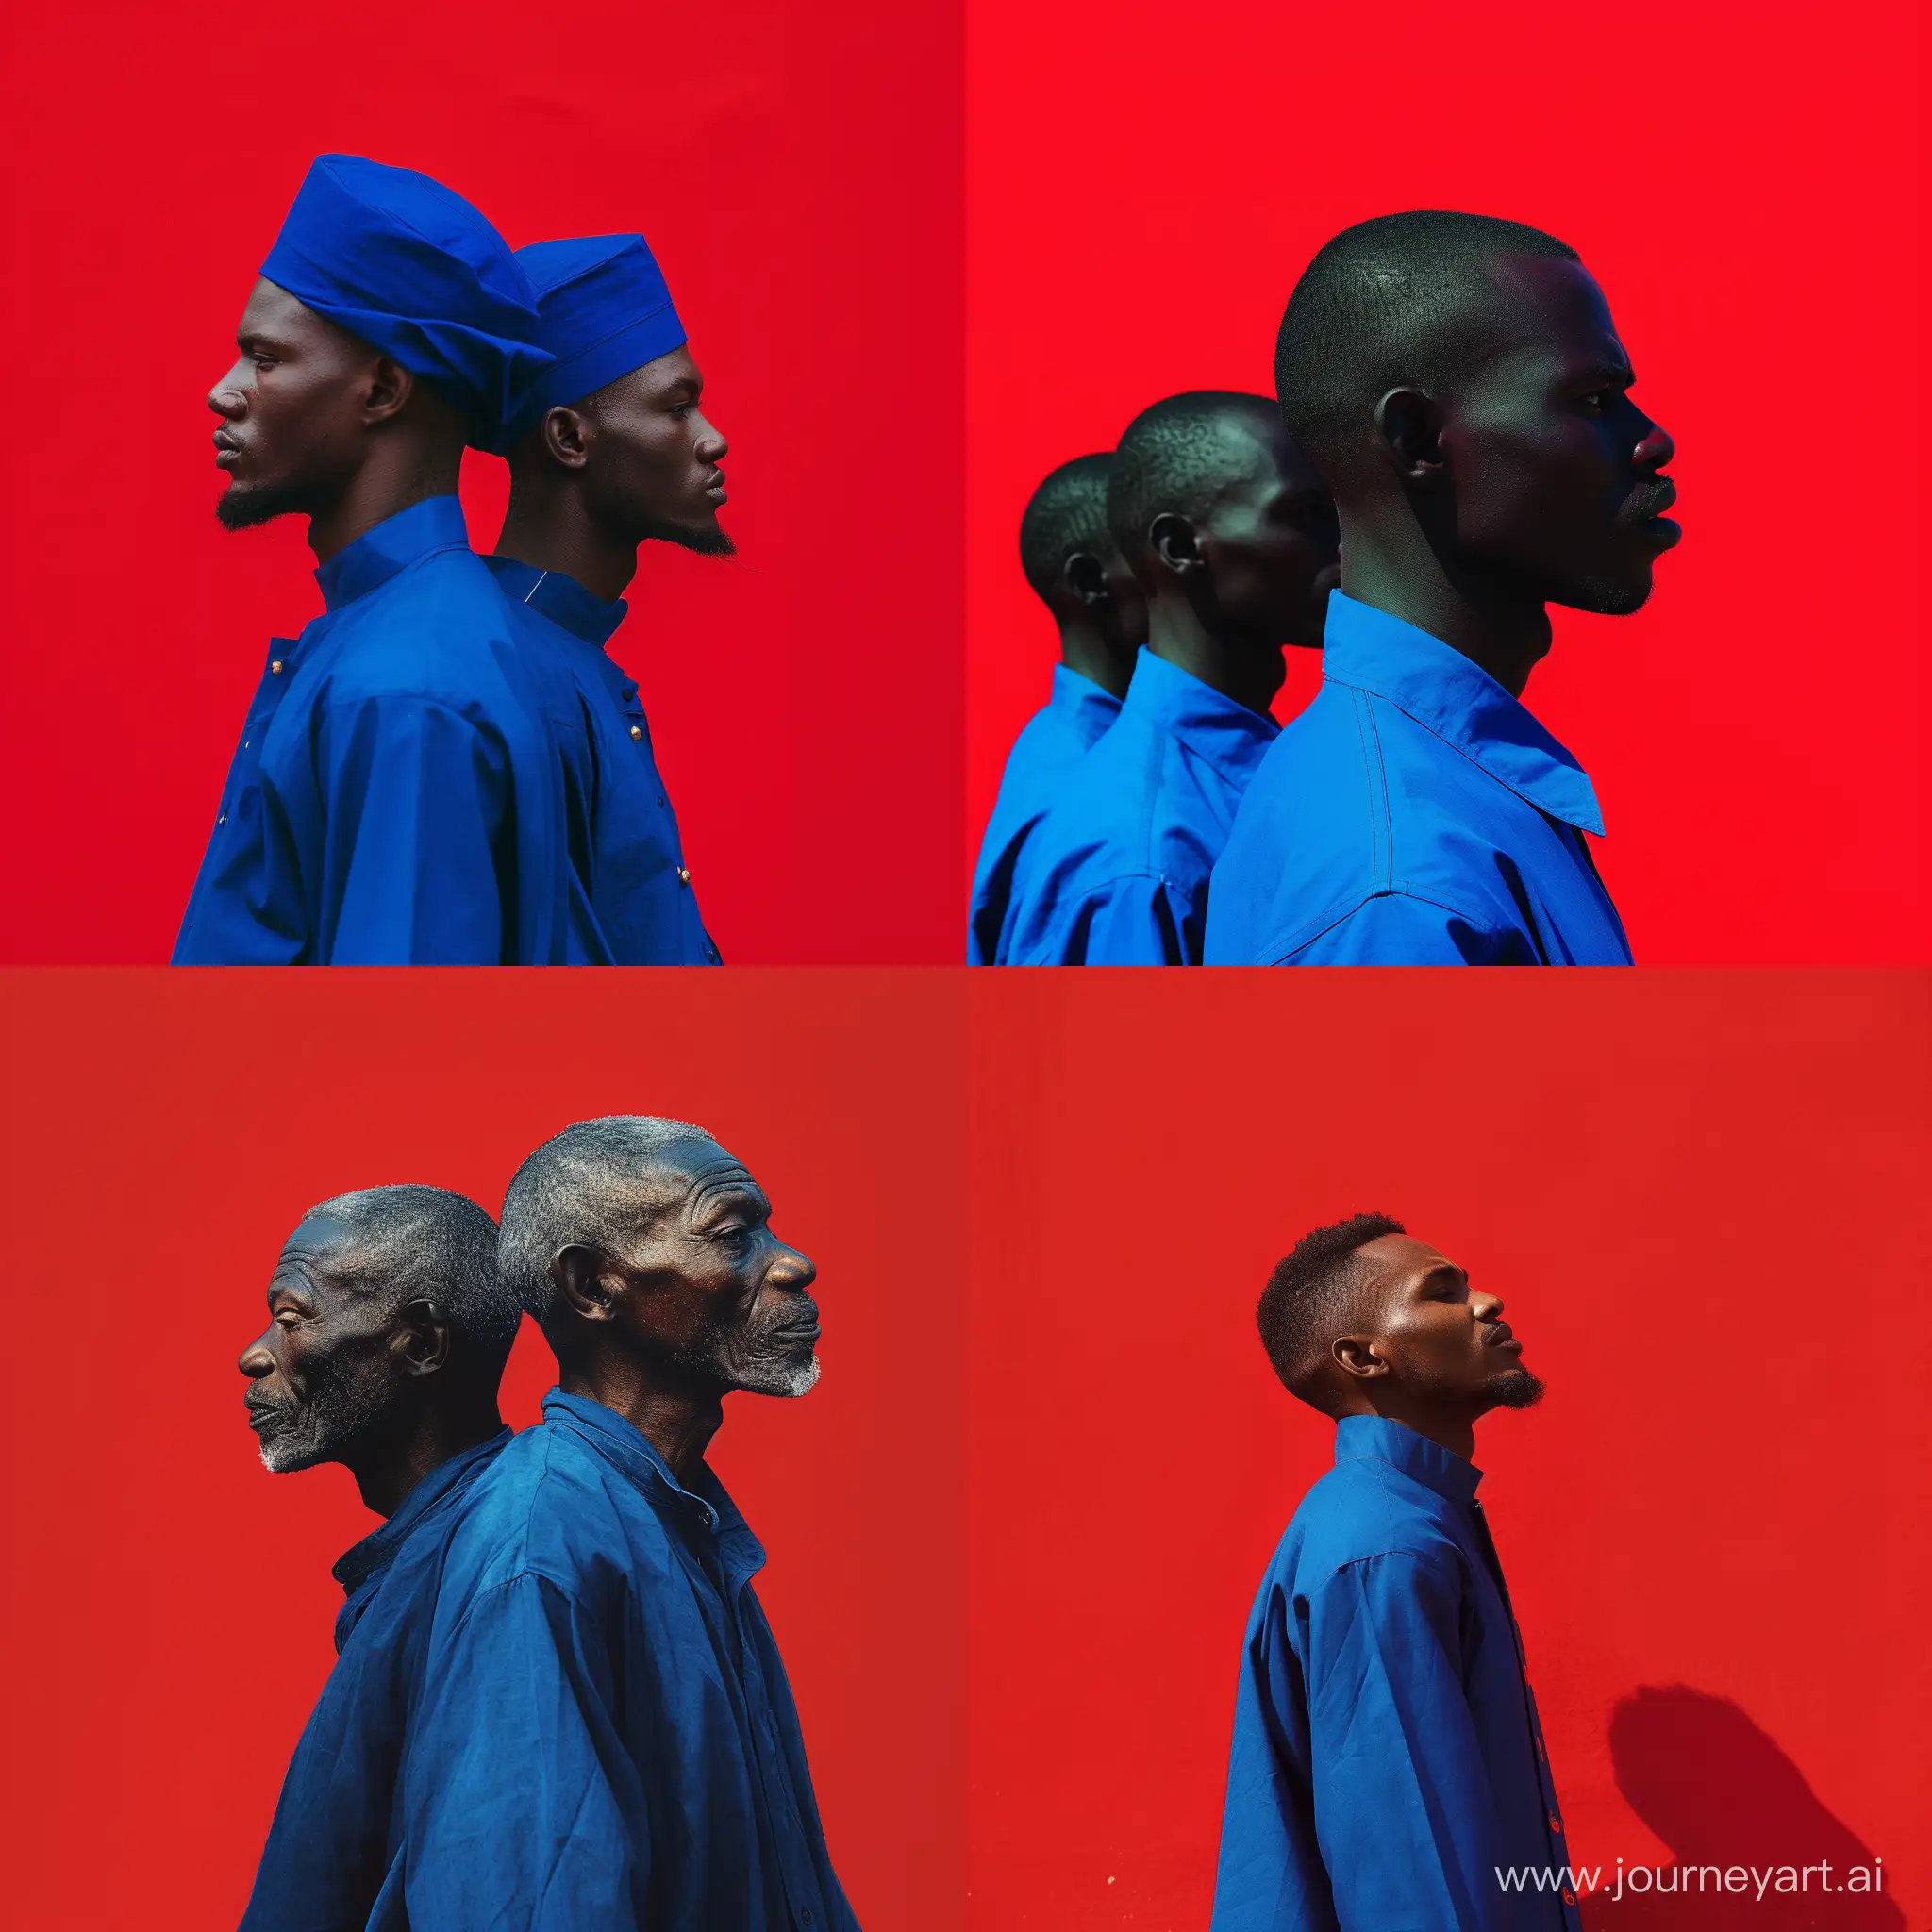 African-Men-in-Blue-Clothes-Striking-Profiles-on-Red-Background